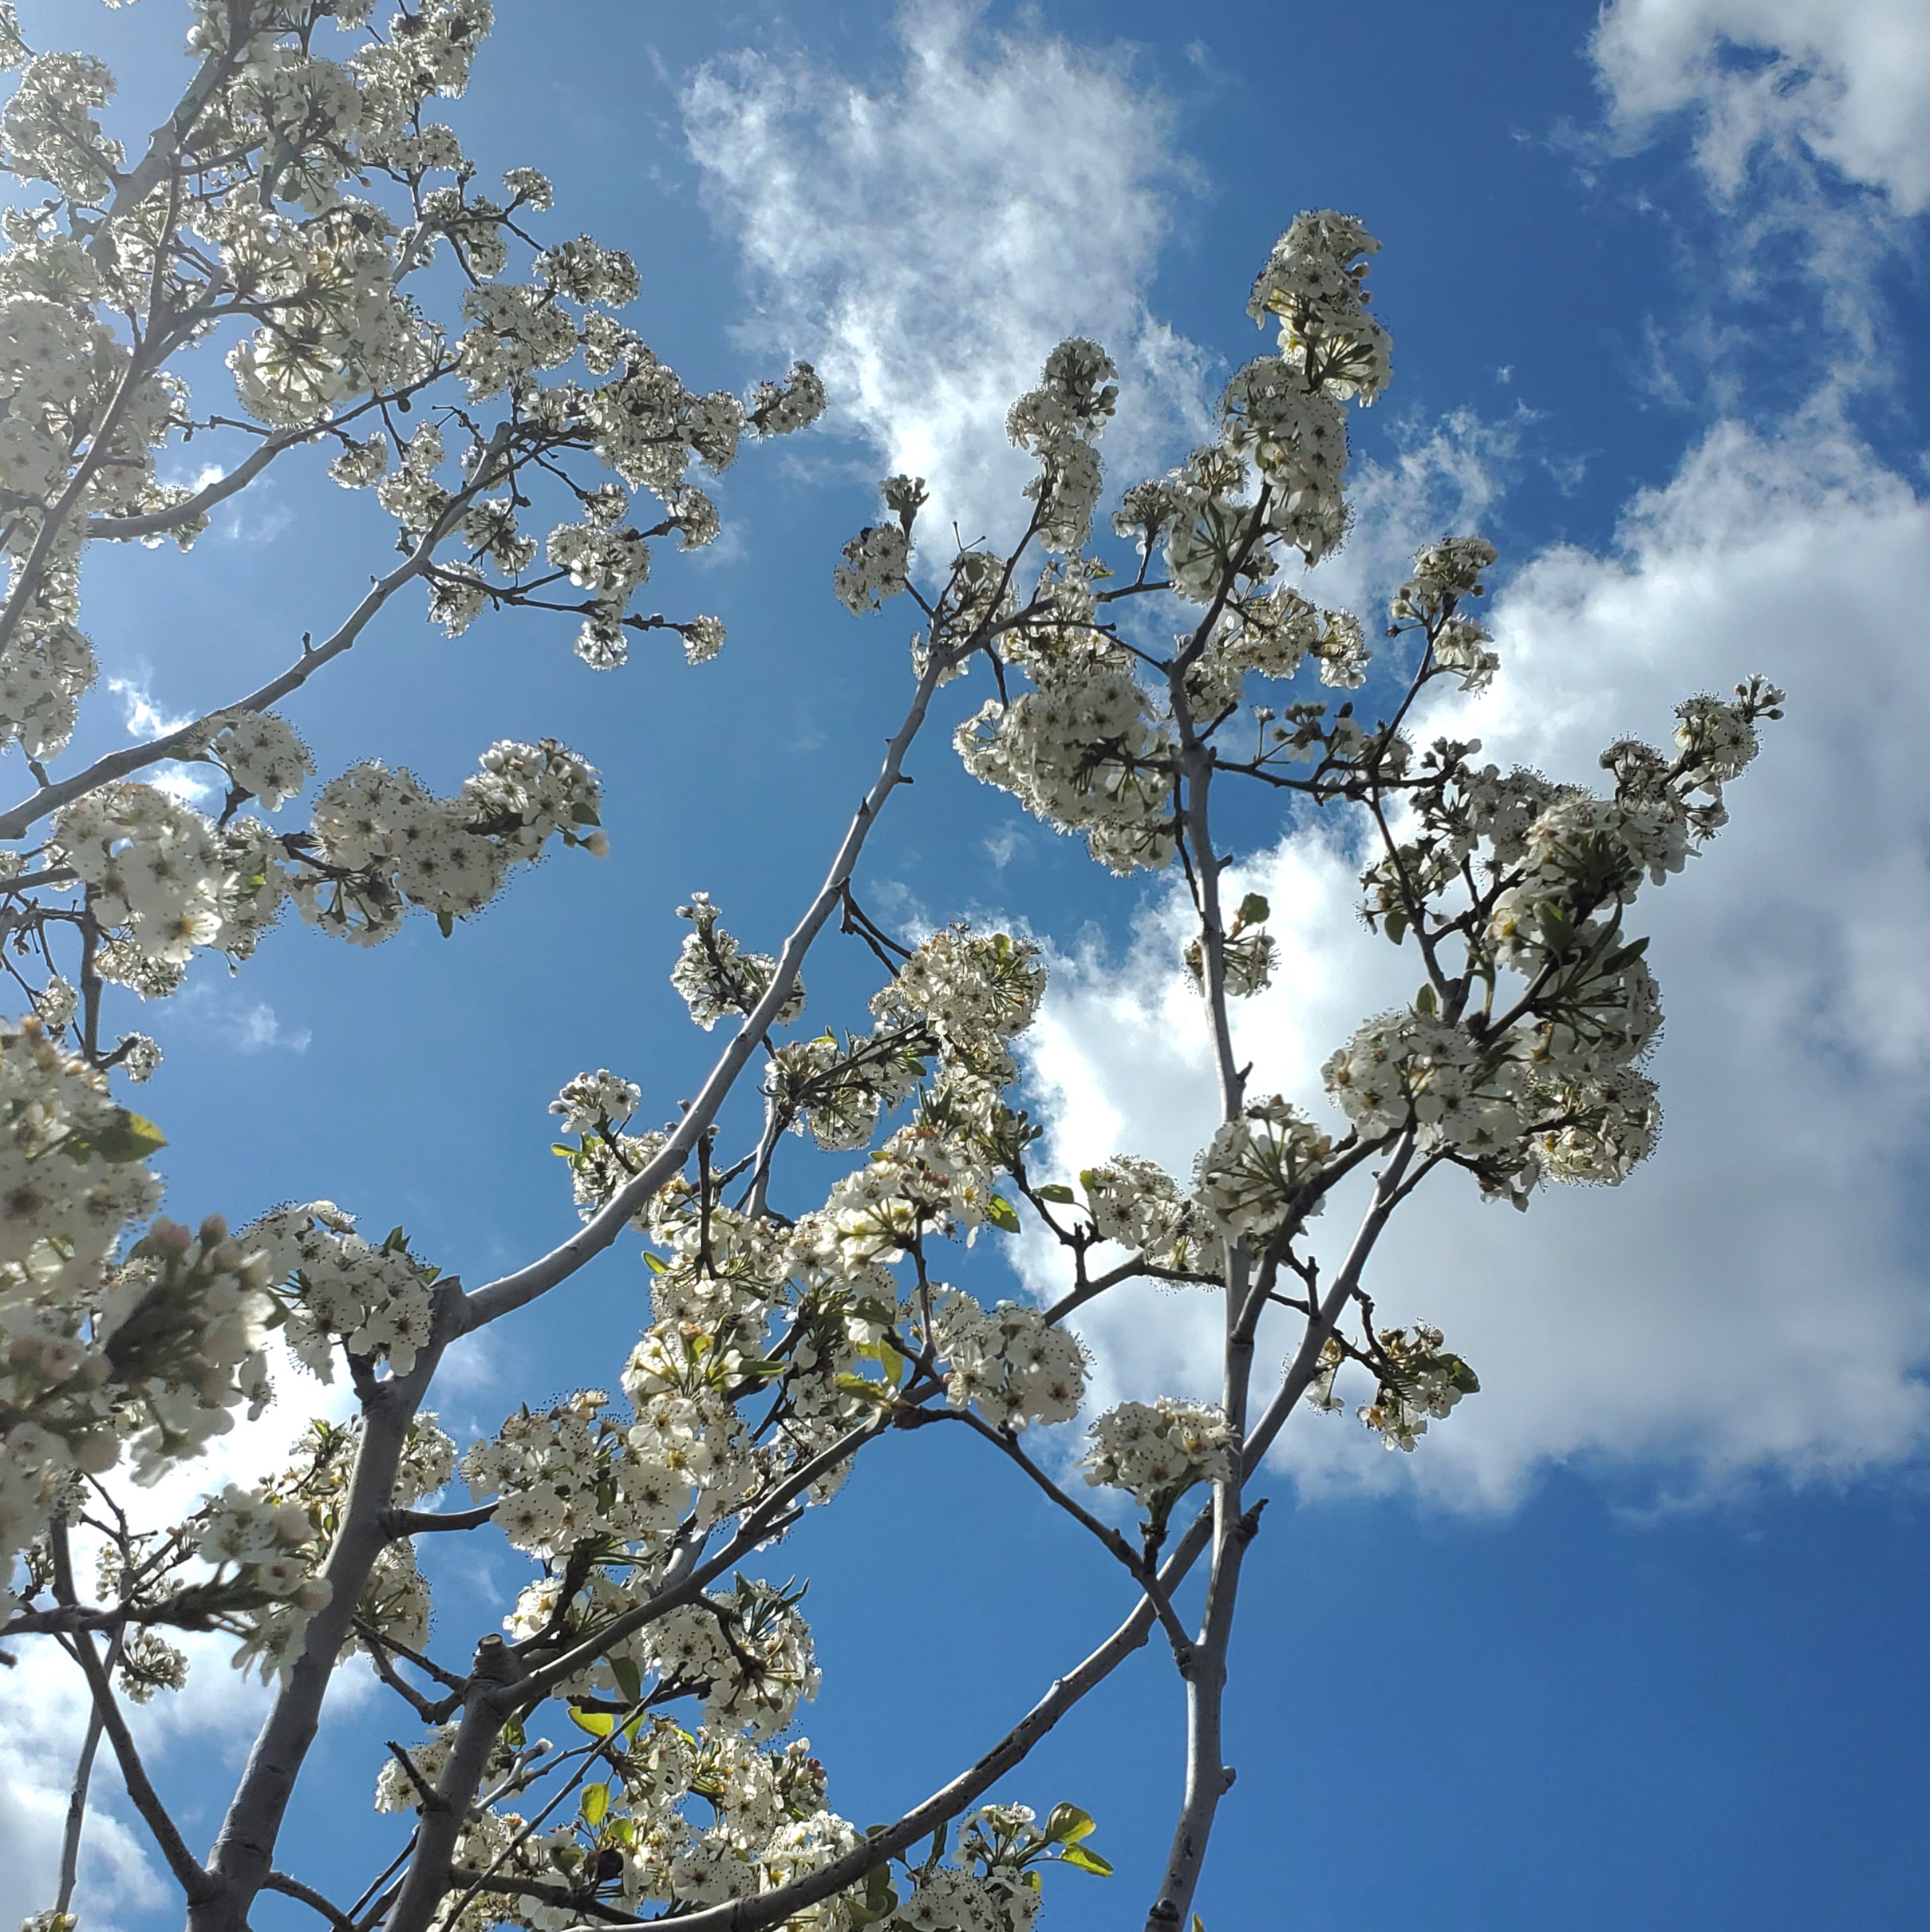 A tree with white blooms and a blue sky background with white clouds.